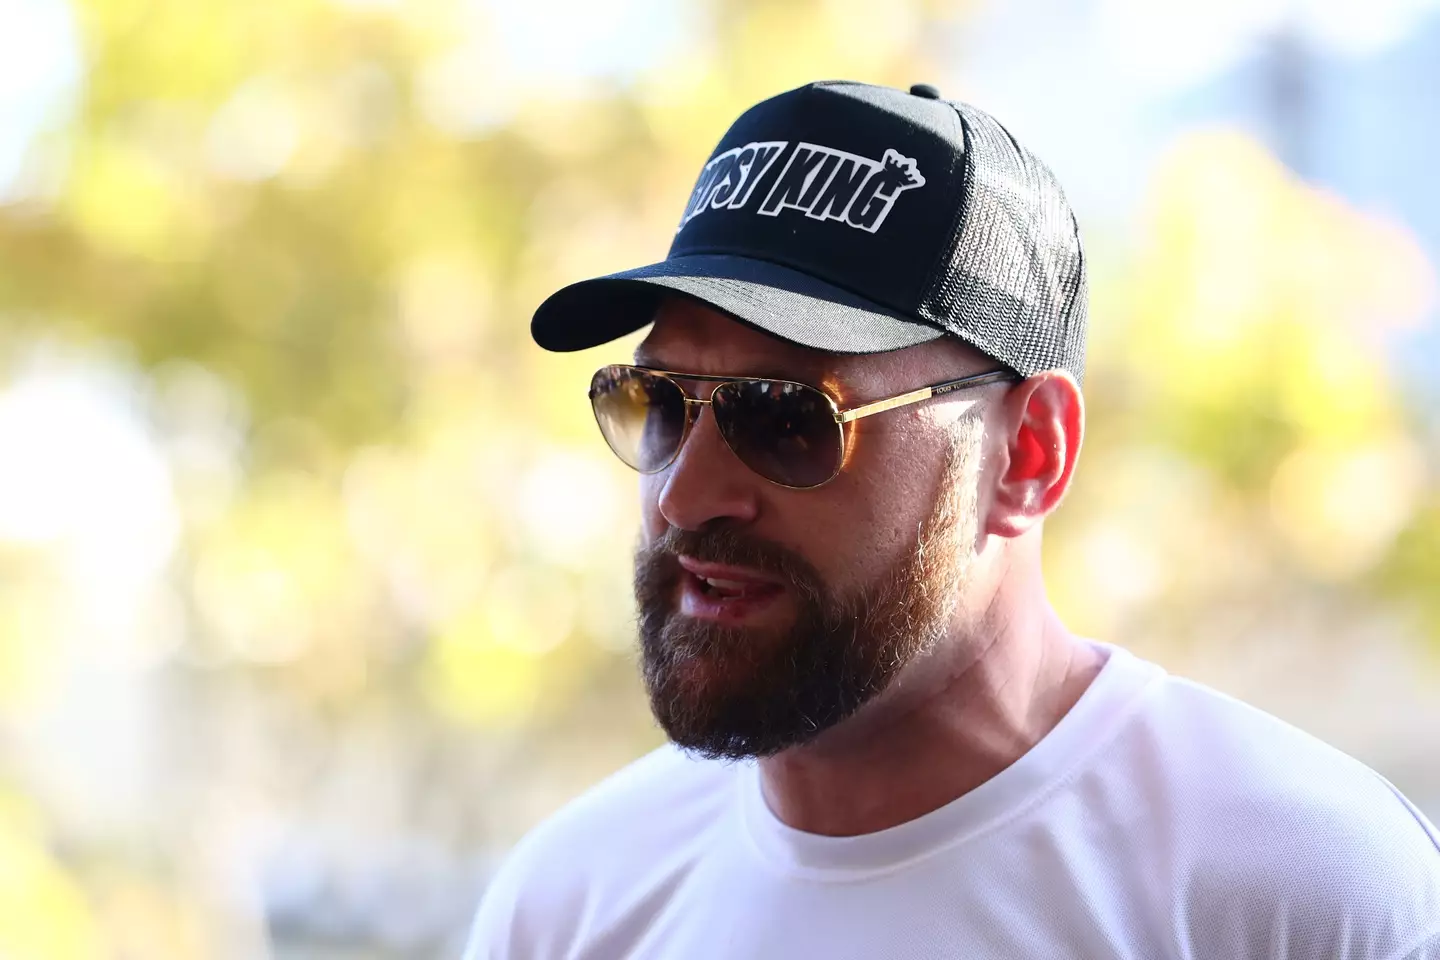 Tyson Fury wanted to cancel his Netflix show during filming.